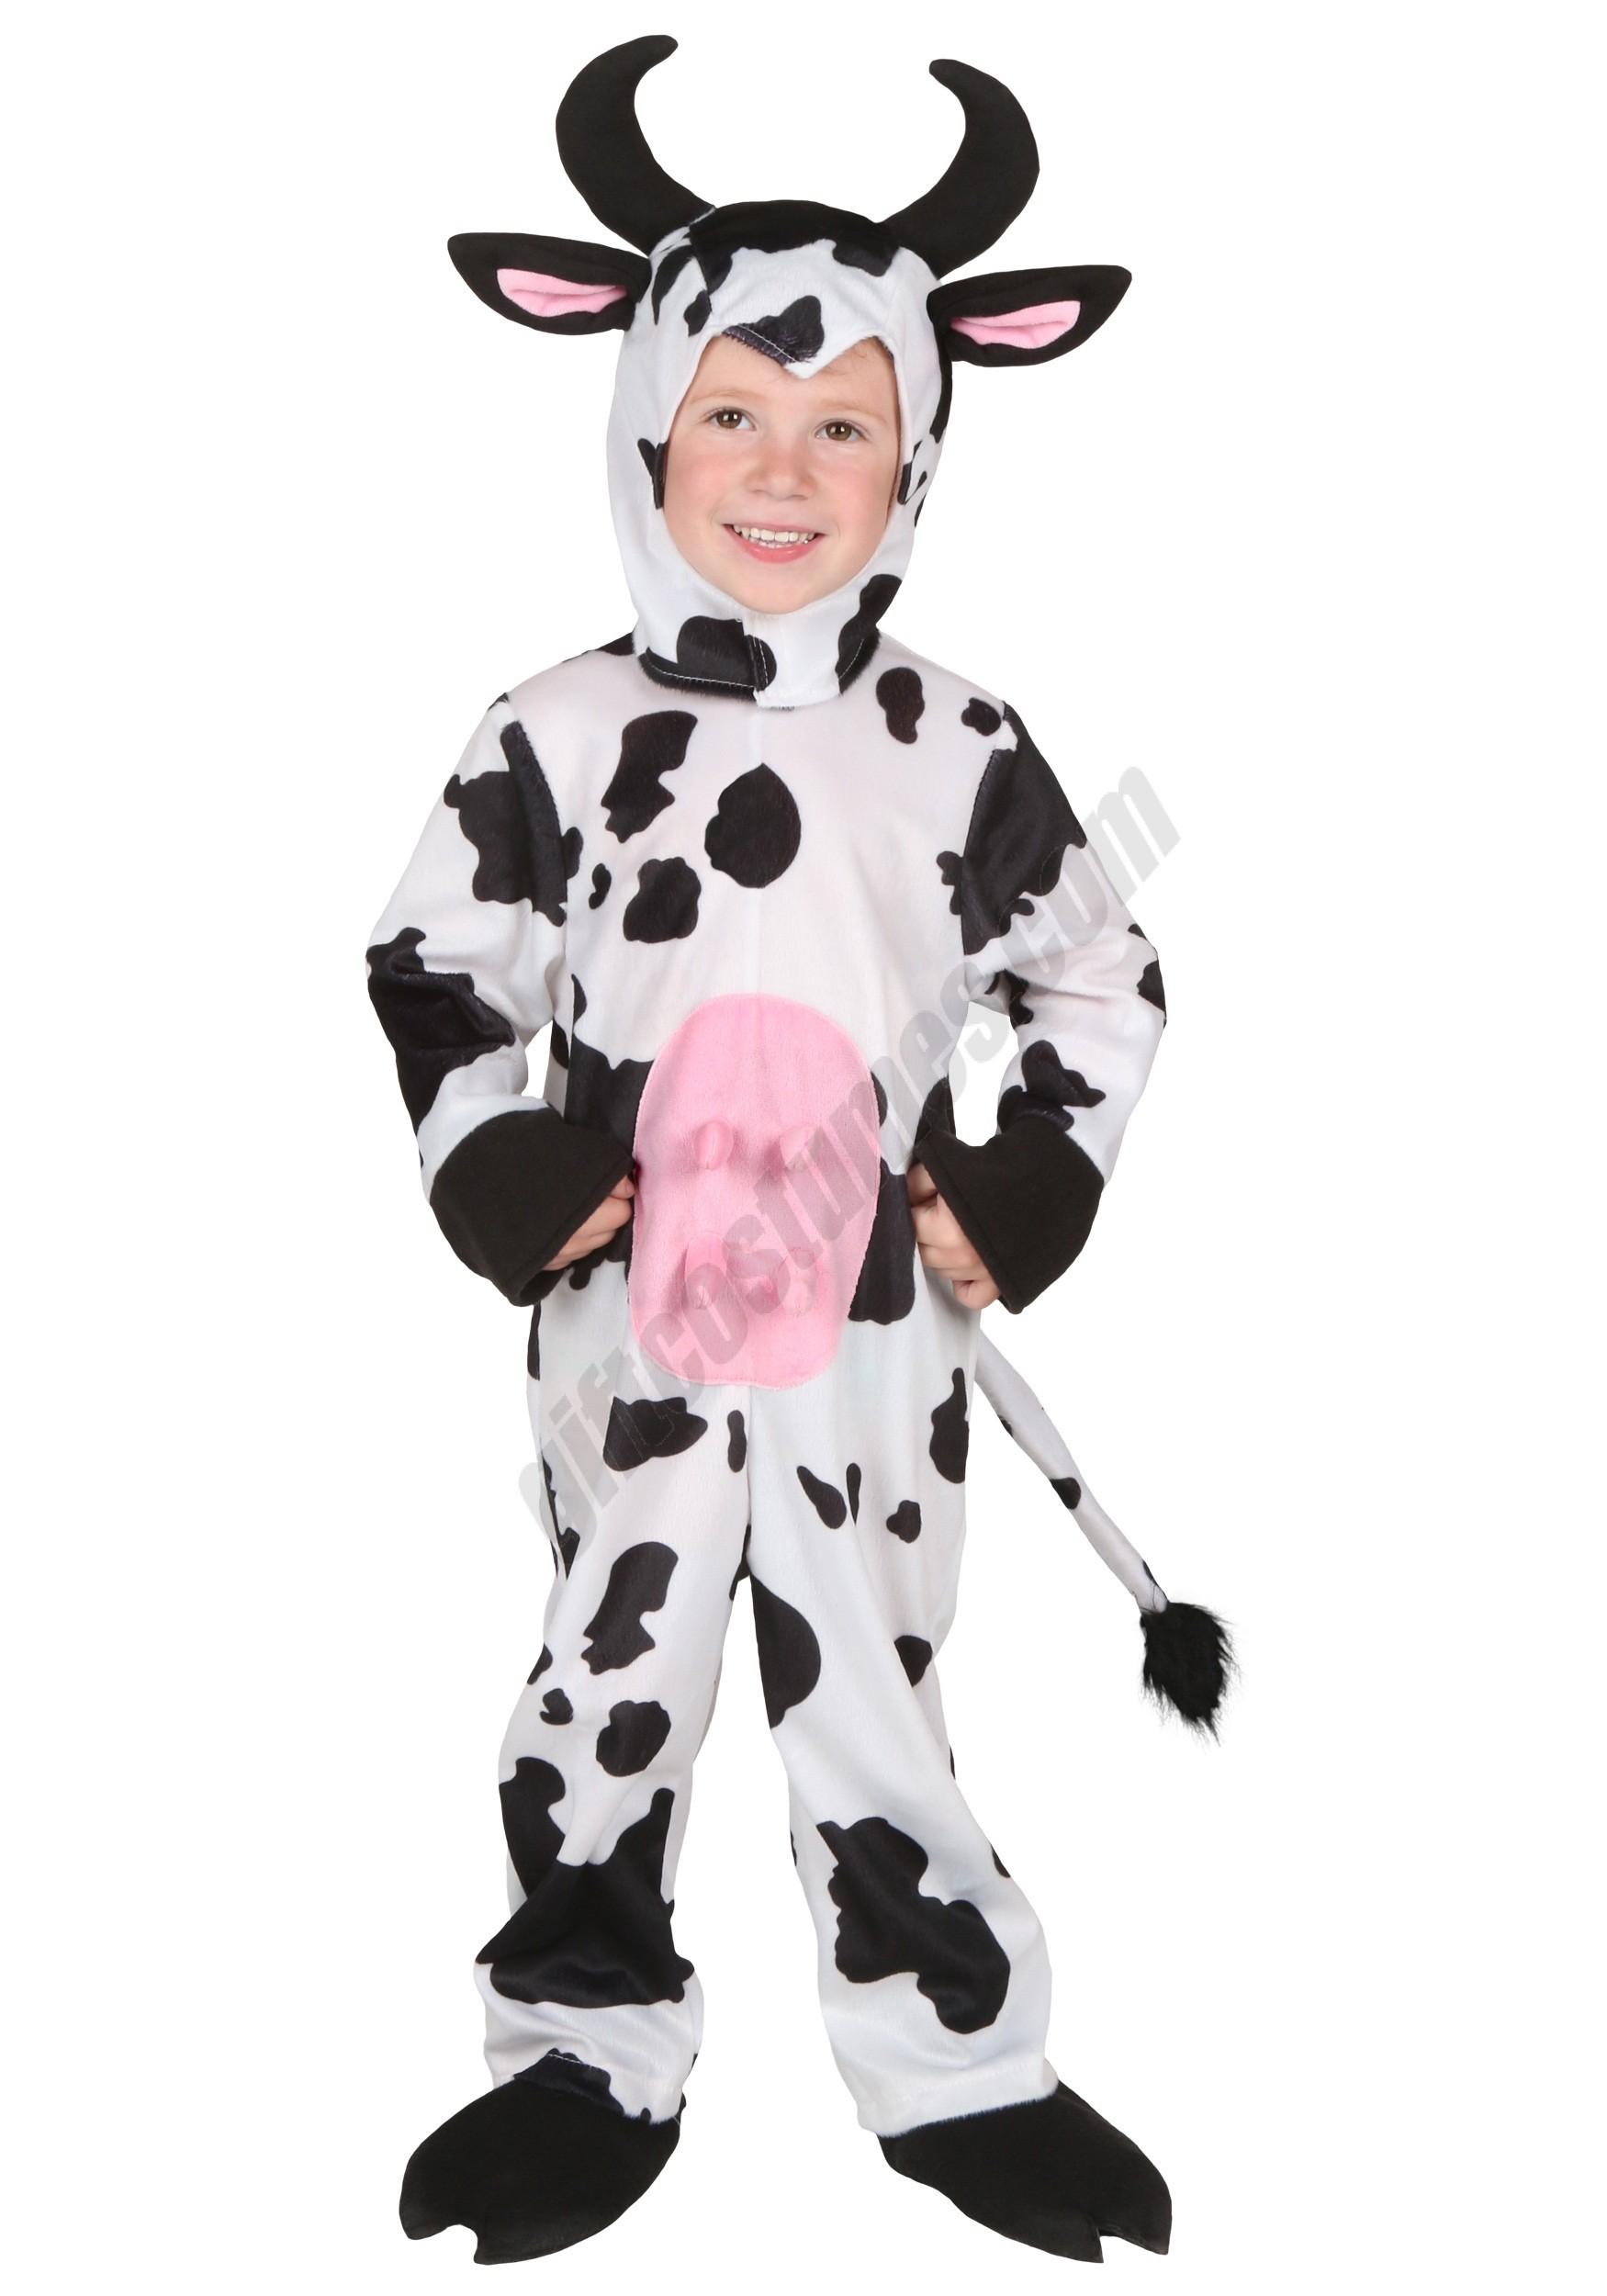 Deluxe Cow Toddler Costume Promotions - Deluxe Cow Toddler Costume Promotions